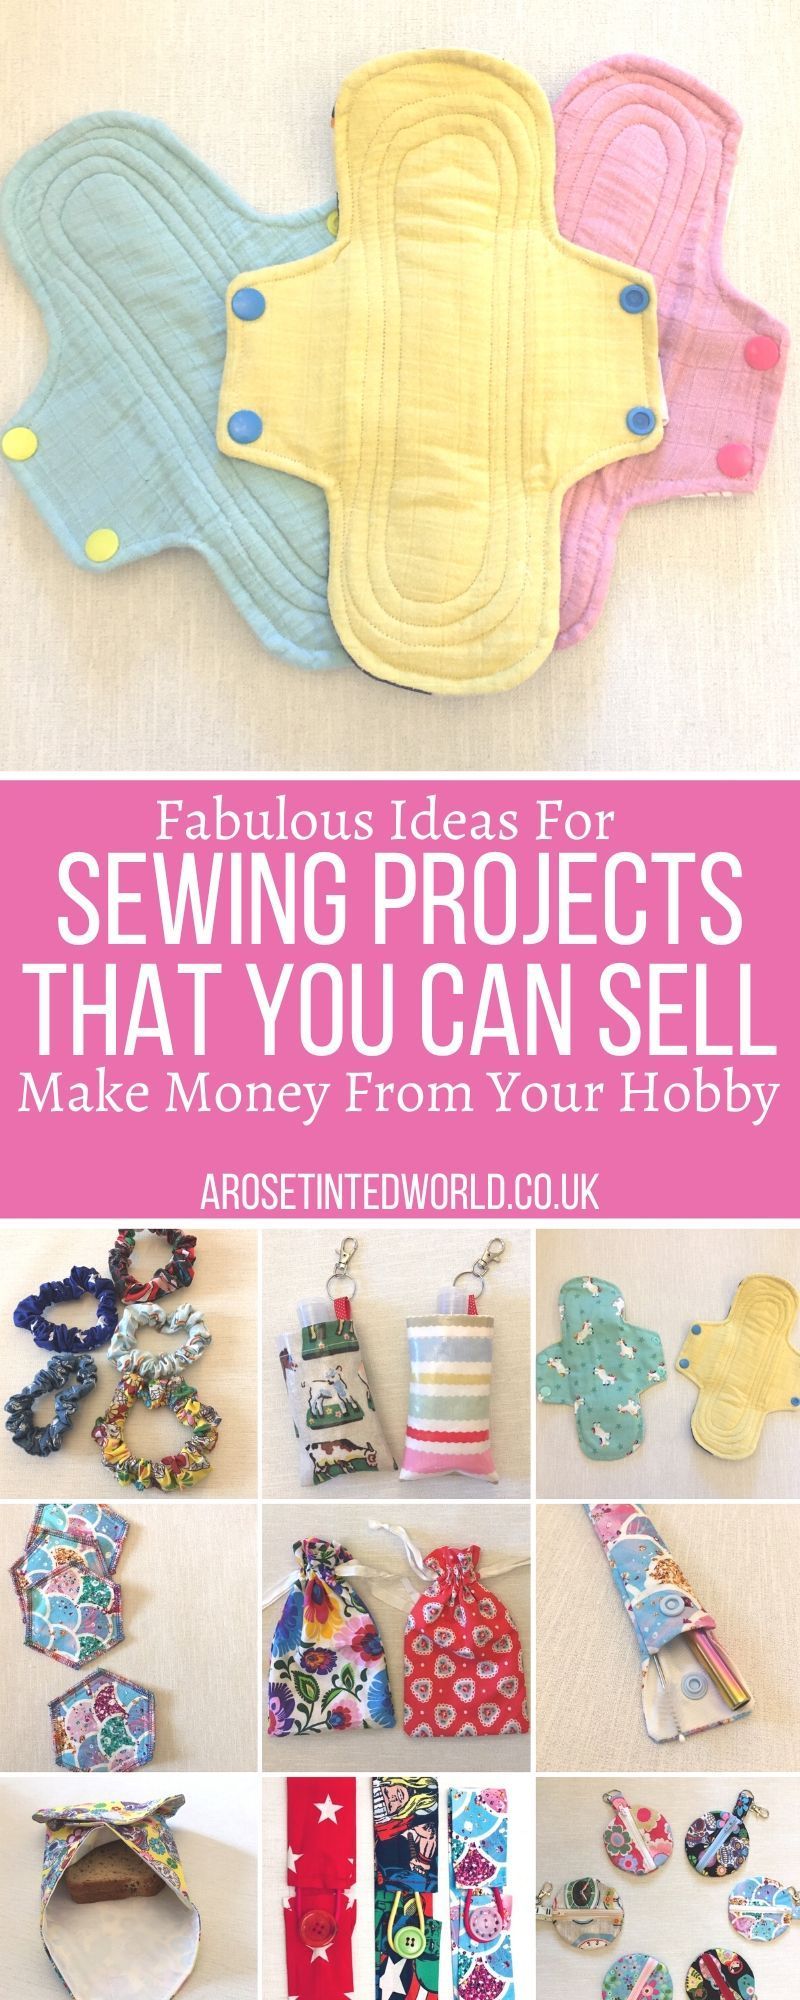 Sewing Projects That You Can Sell -   18 fabric crafts to sell gift ideas